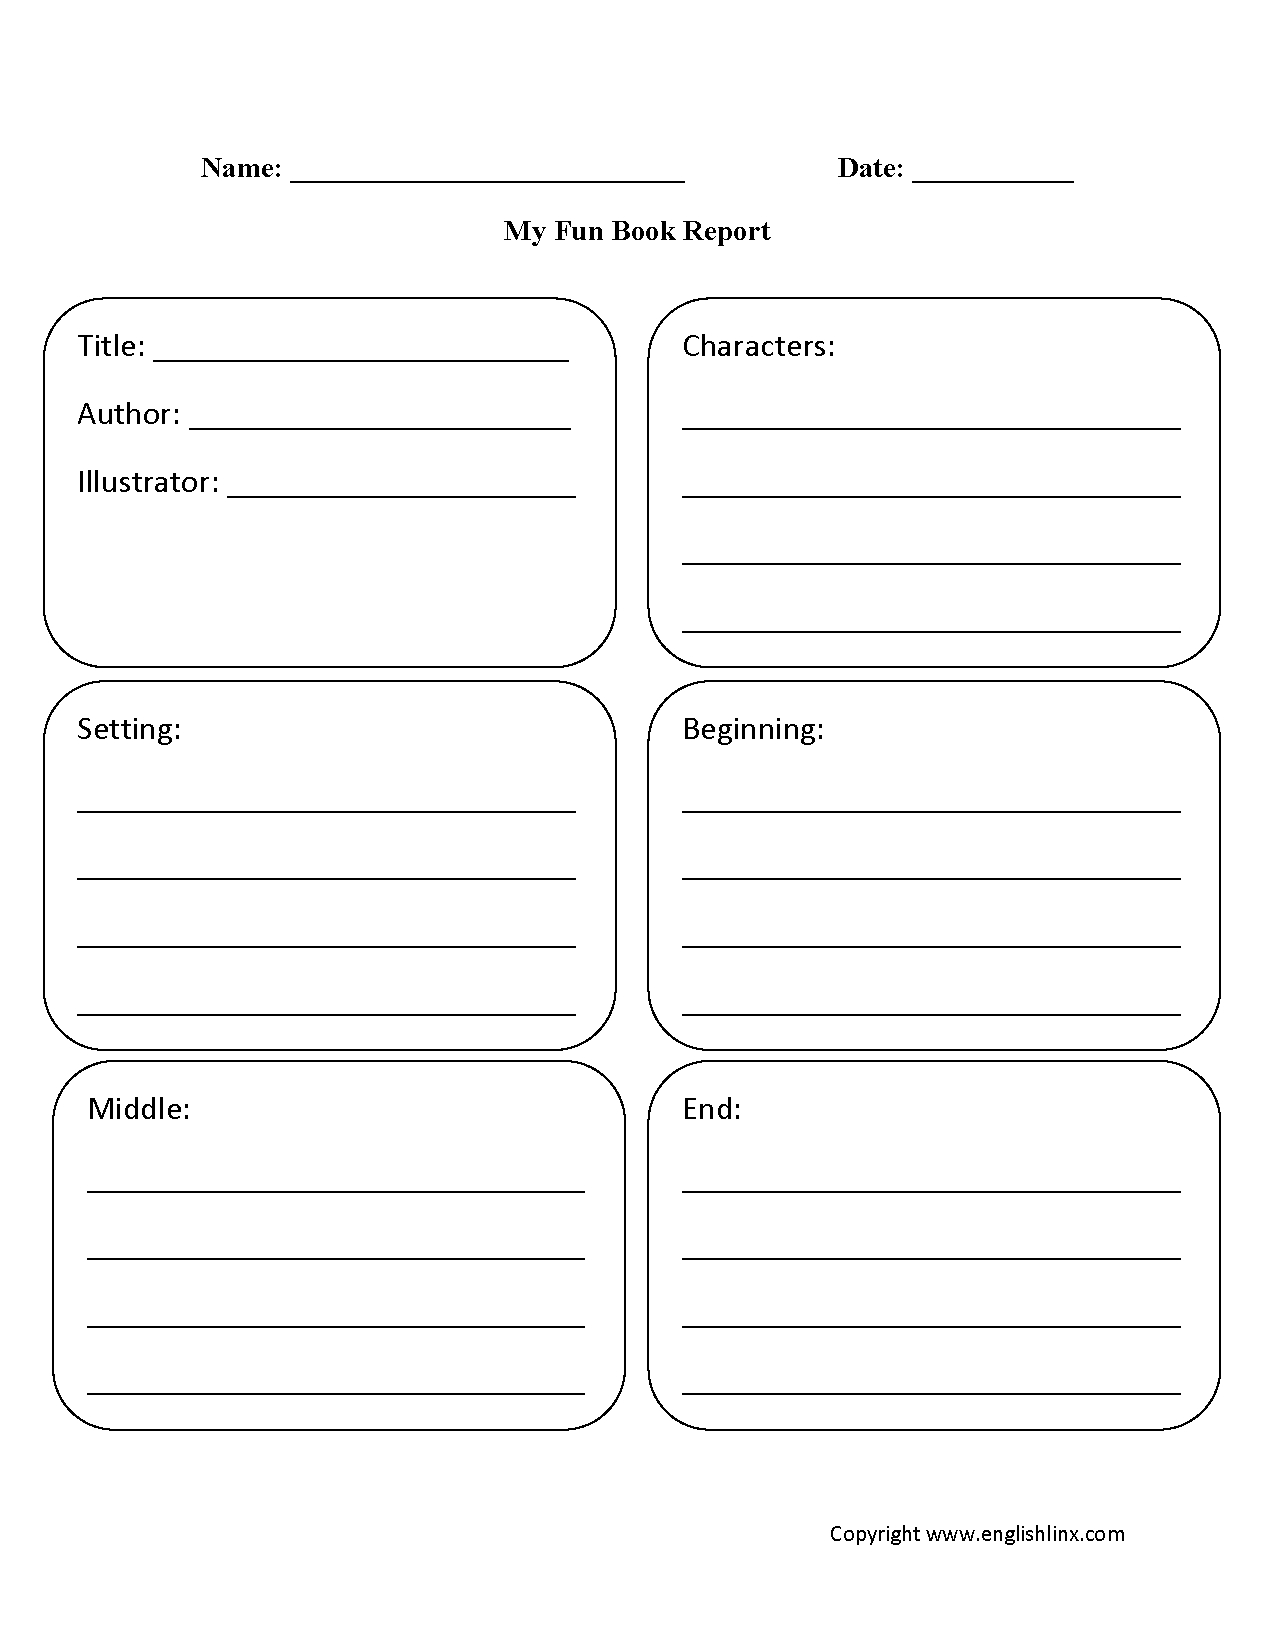 Englishlinx | Book Report Worksheets For Middle School Book Report Template